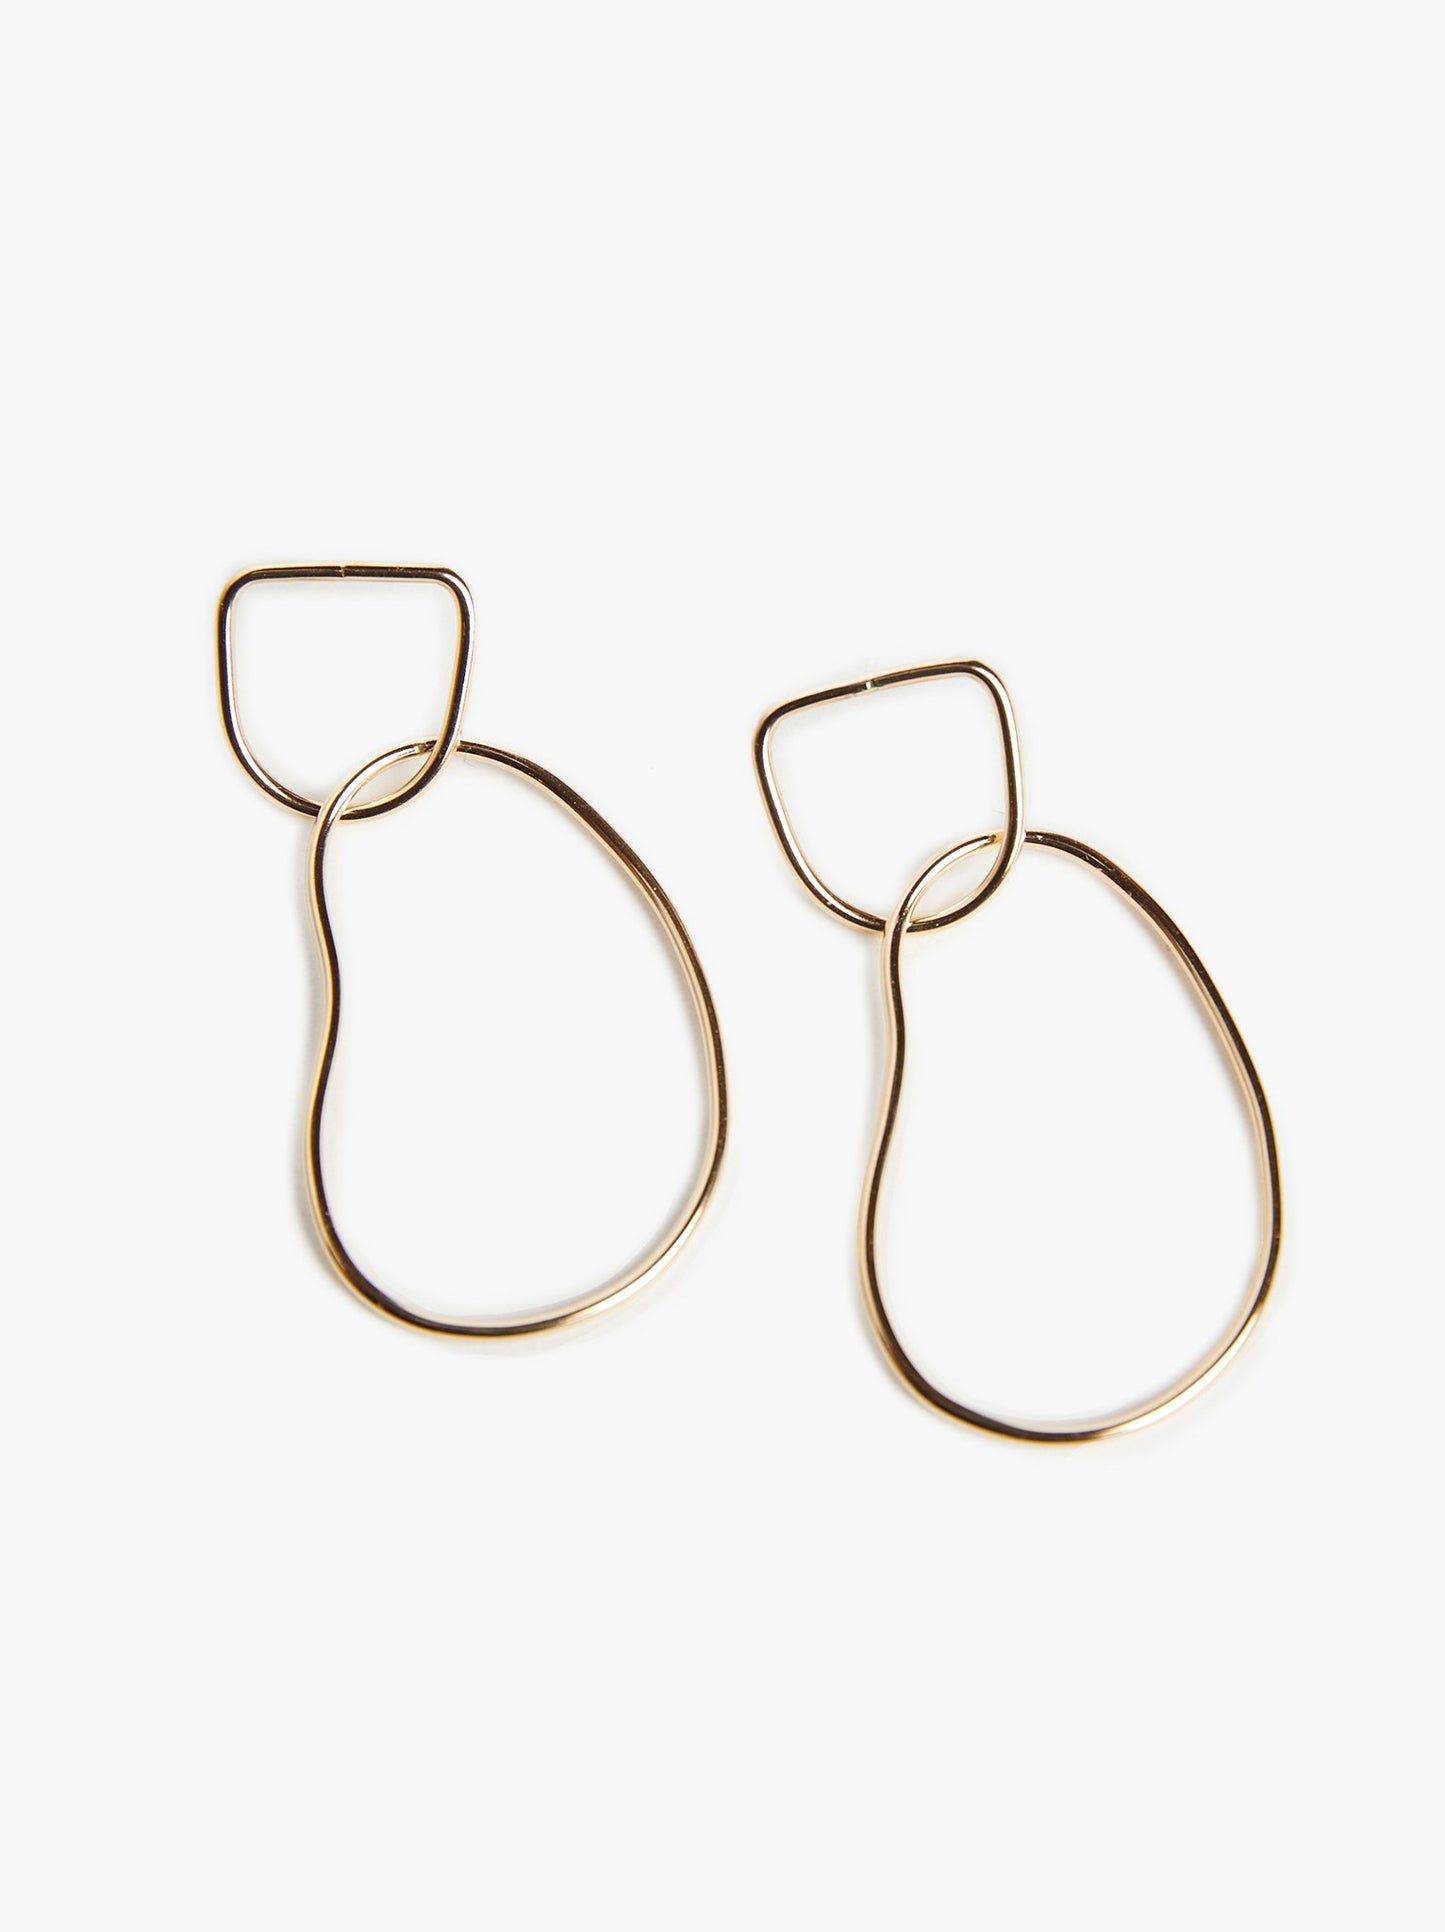 ABLE - Organic Drop Earrings - Gold-filled